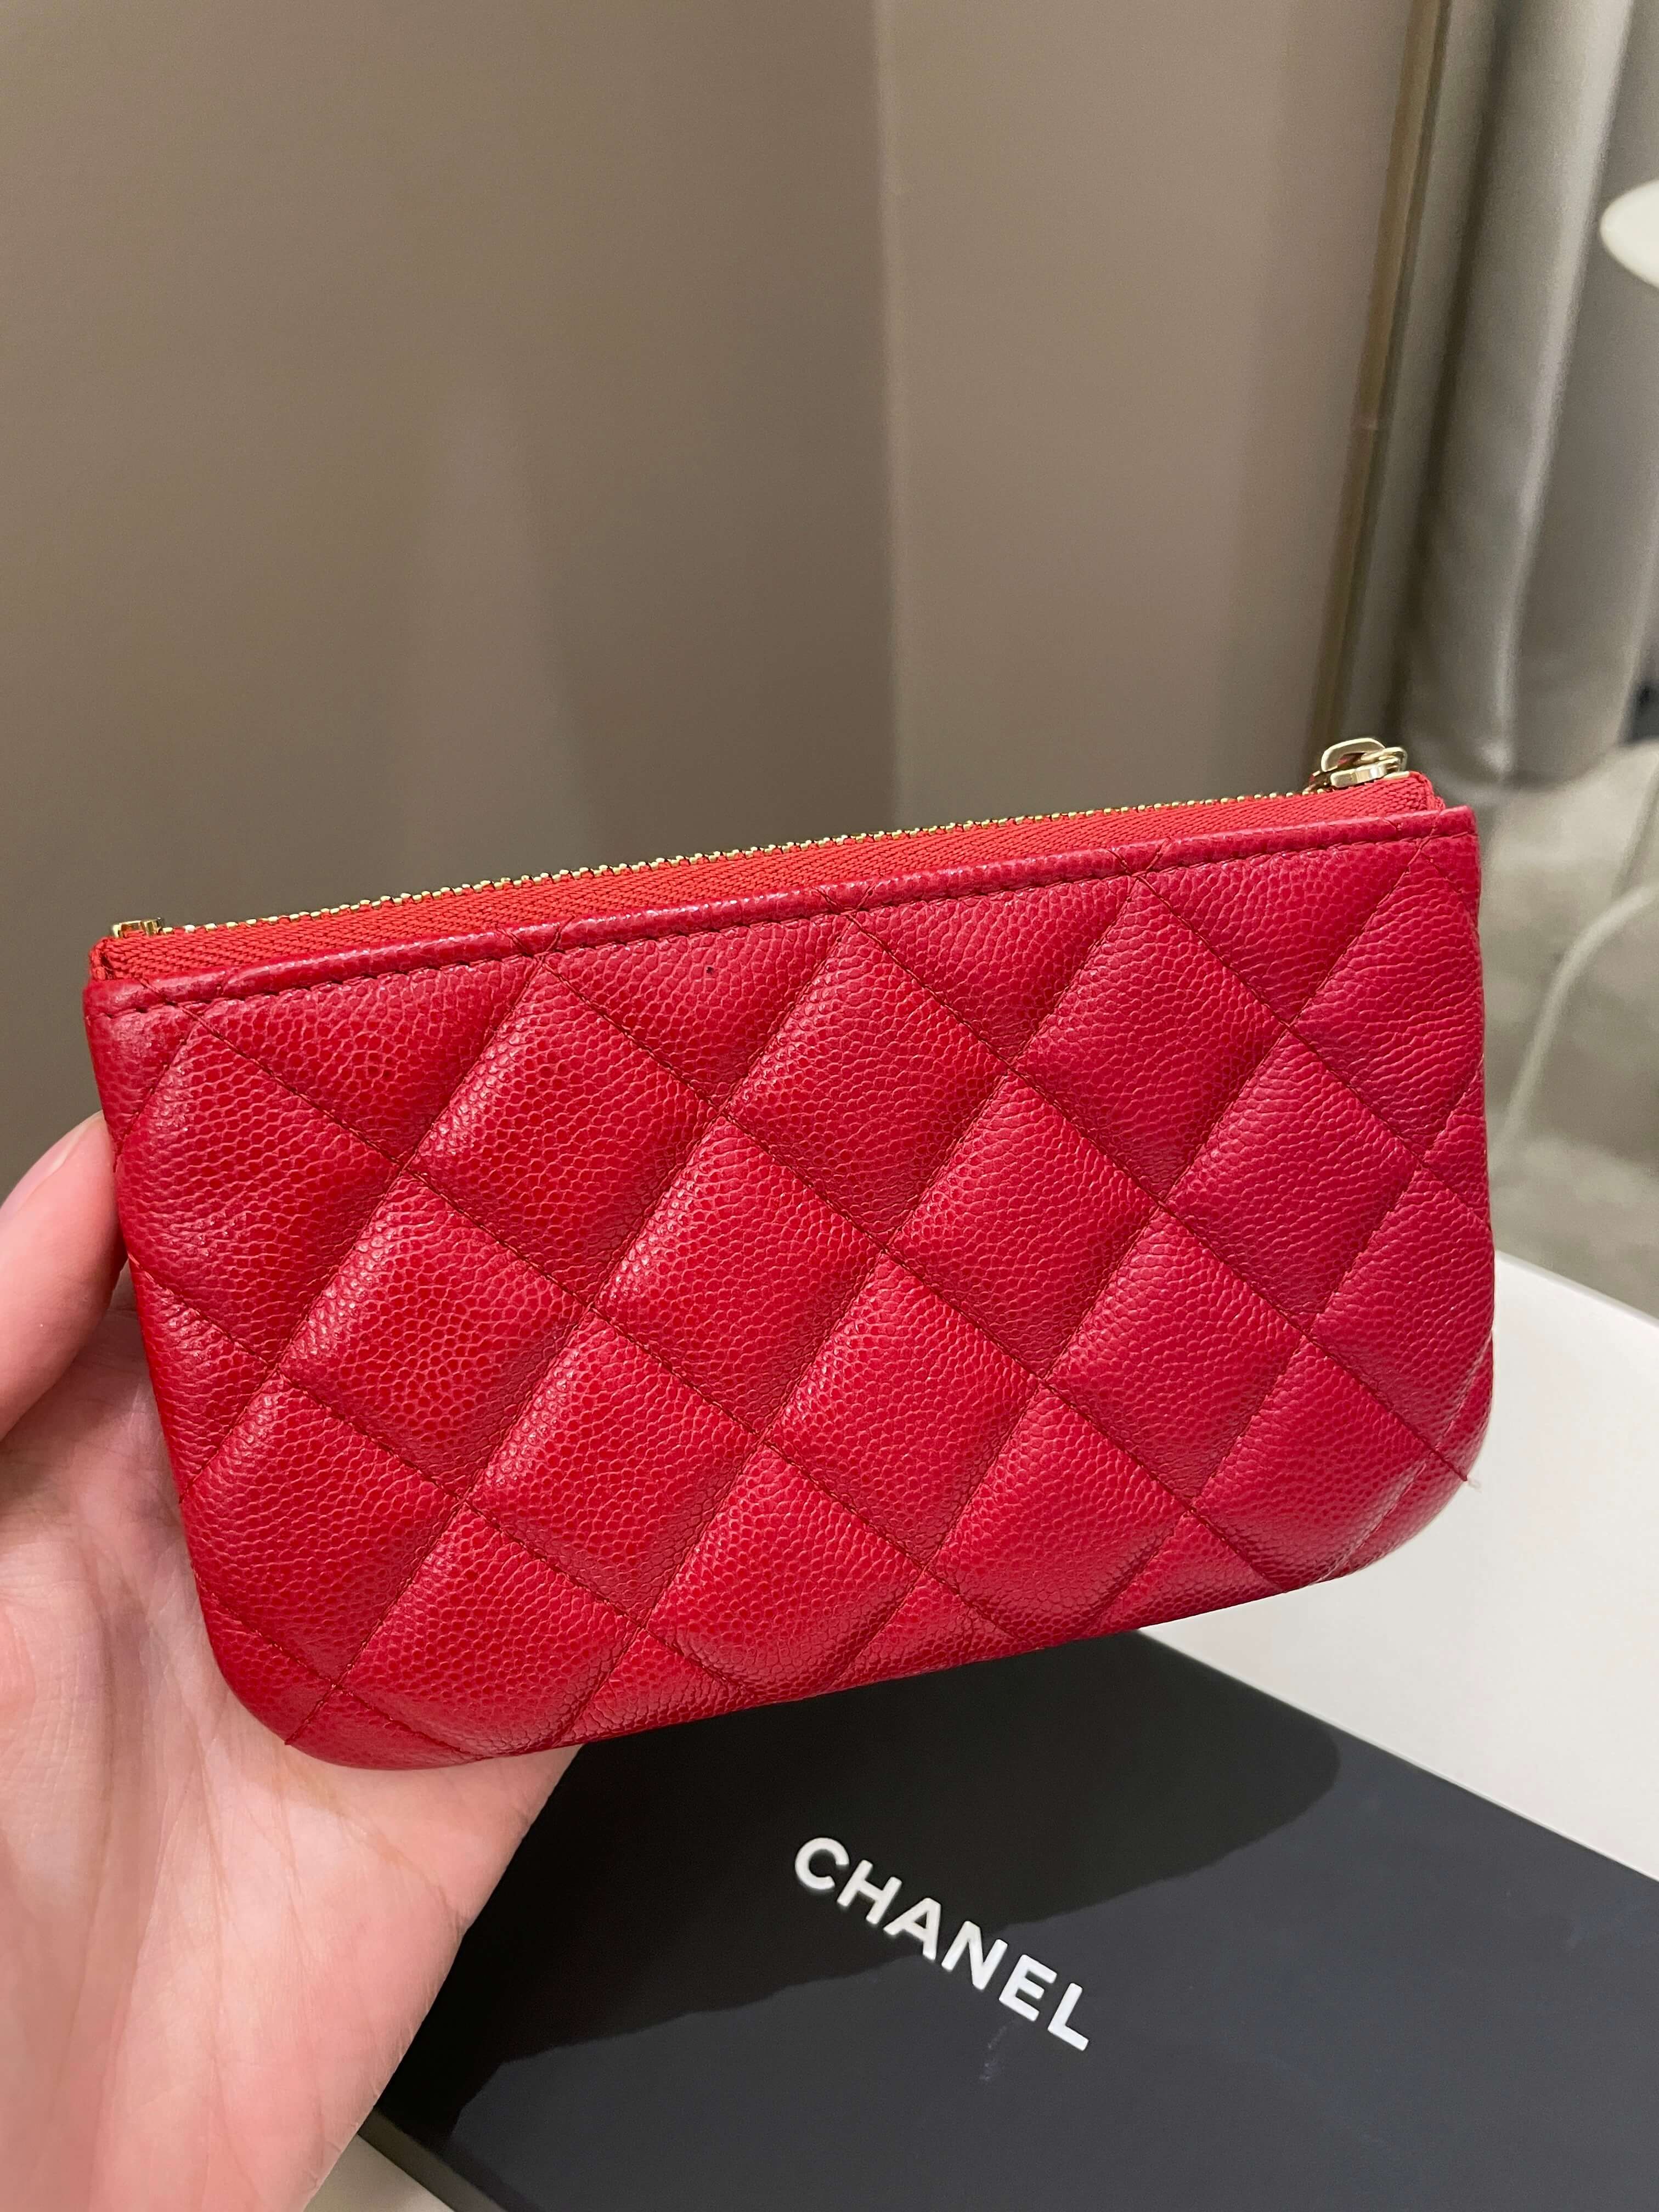 Chanel Classic Quilted Mini OCase
Red Caviar